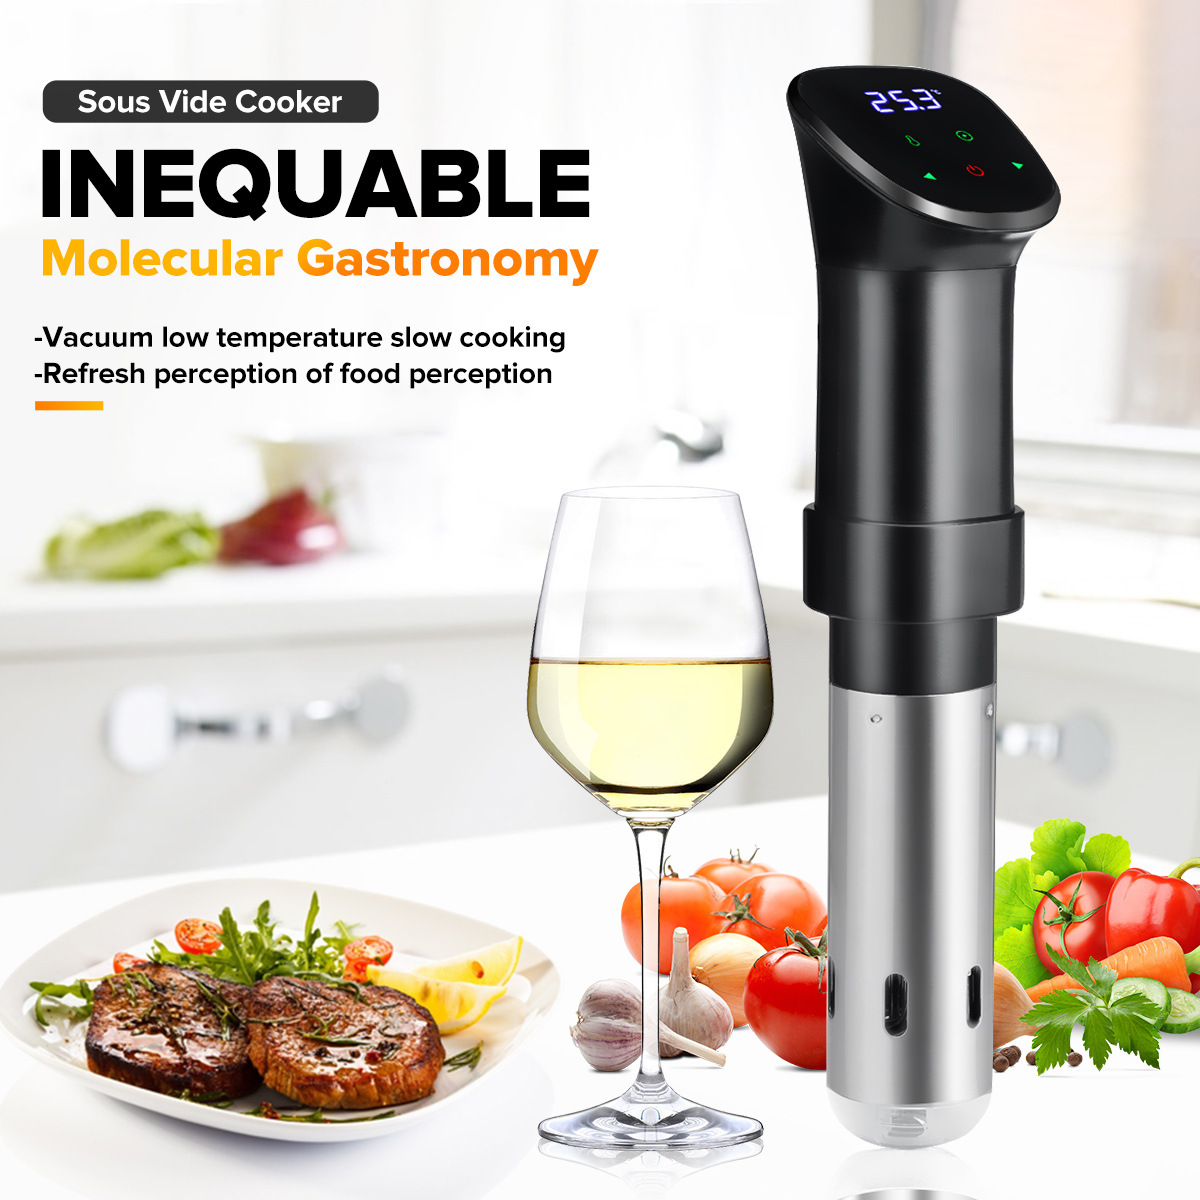 AUGIENB-SC-003-1600W-LCD-Touch-Sous-Vide-Cooker-Waterproof-Sous-Vide-Immersion-Circulator-Vacuum-Hea-1936799-2